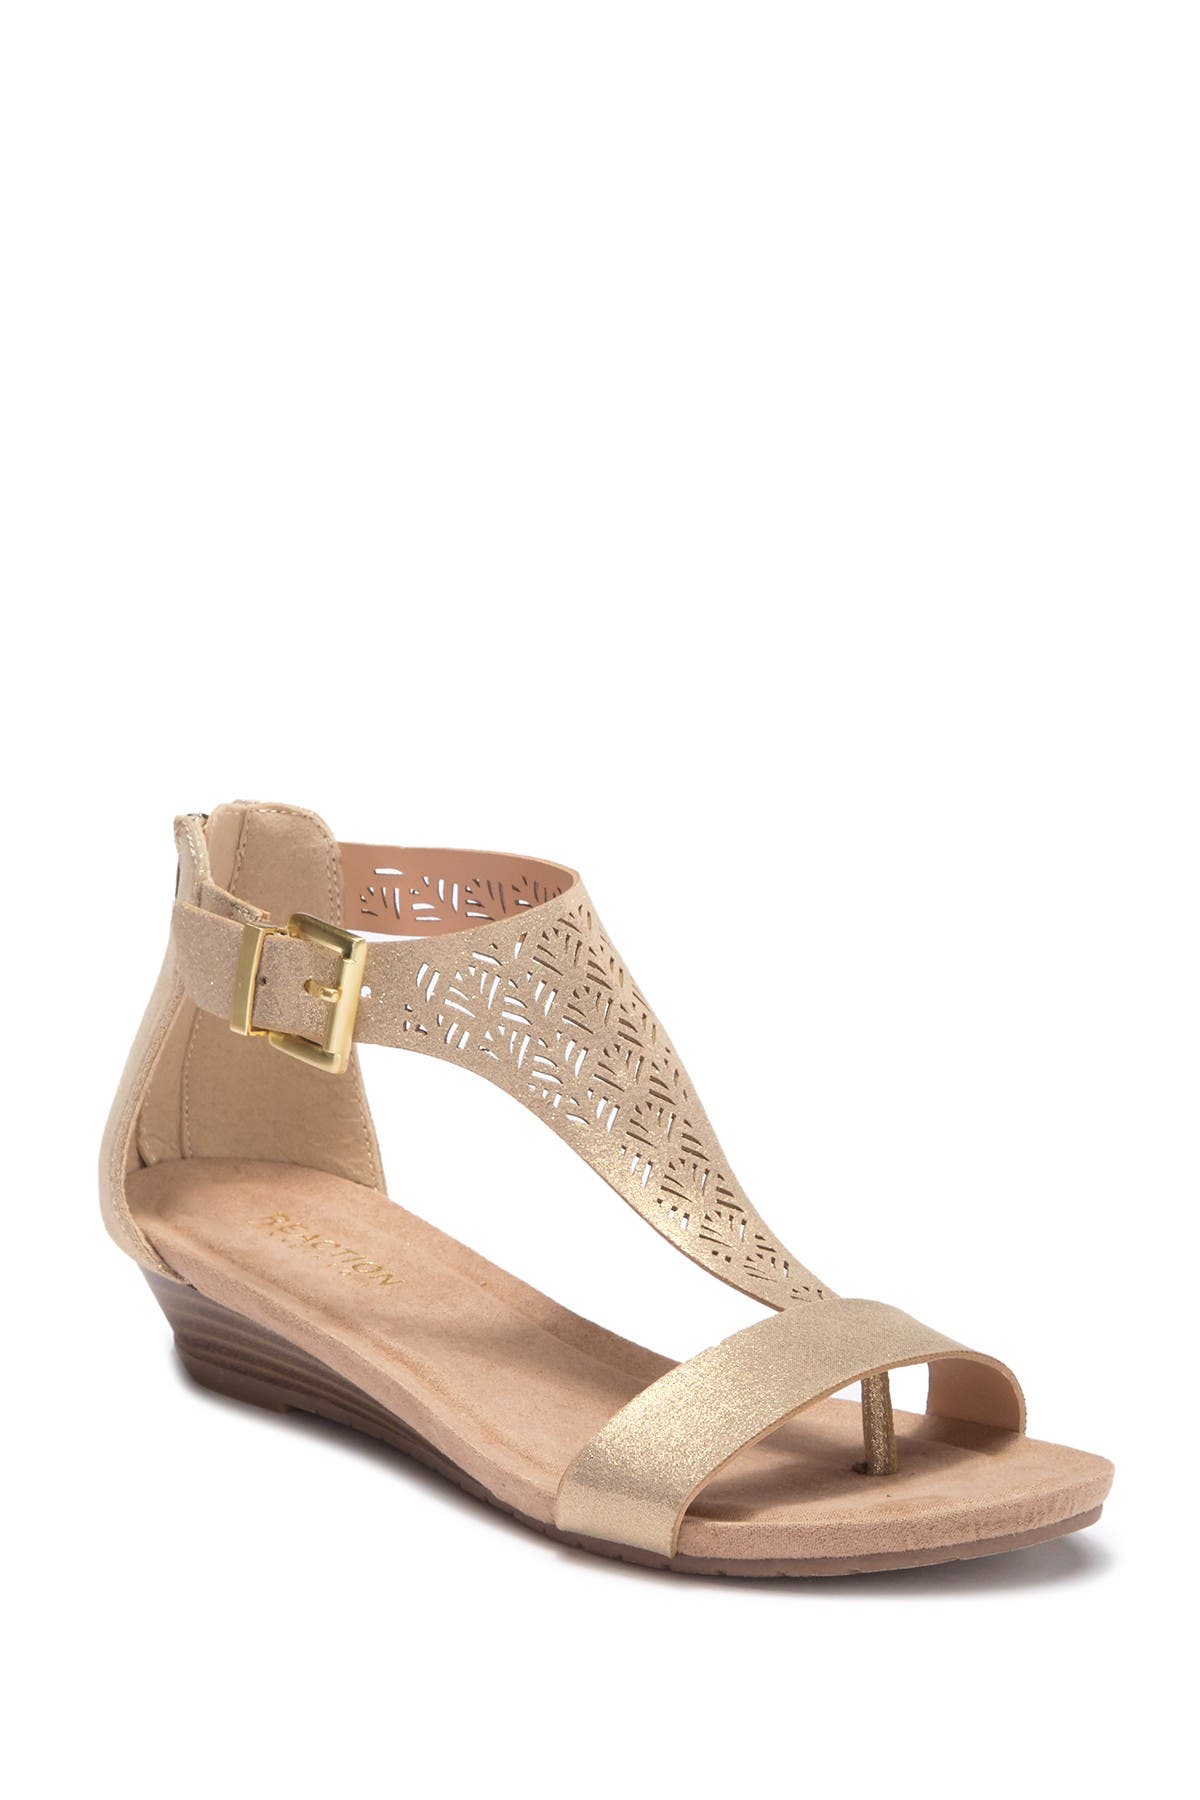 kenneth cole reaction wedges